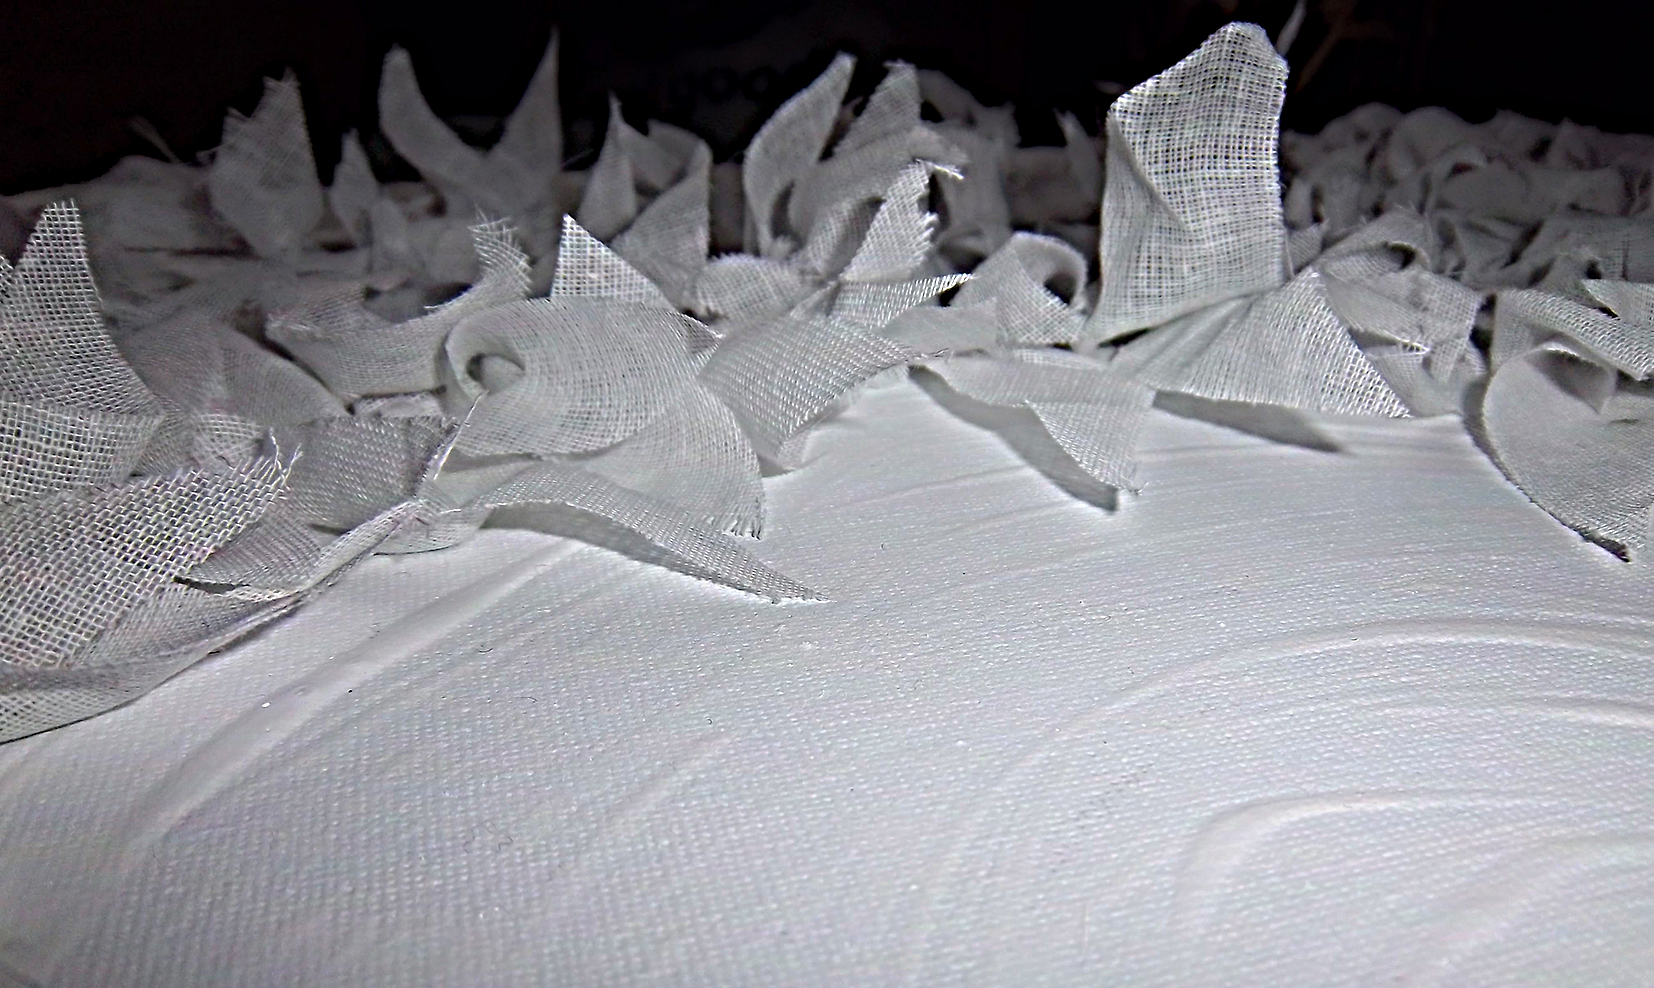 a spread of white muslin covered from the midground to the distance in feathery shipets of the same white fabric. Sharply focused in the forground the image fades to black in the unfocused background.